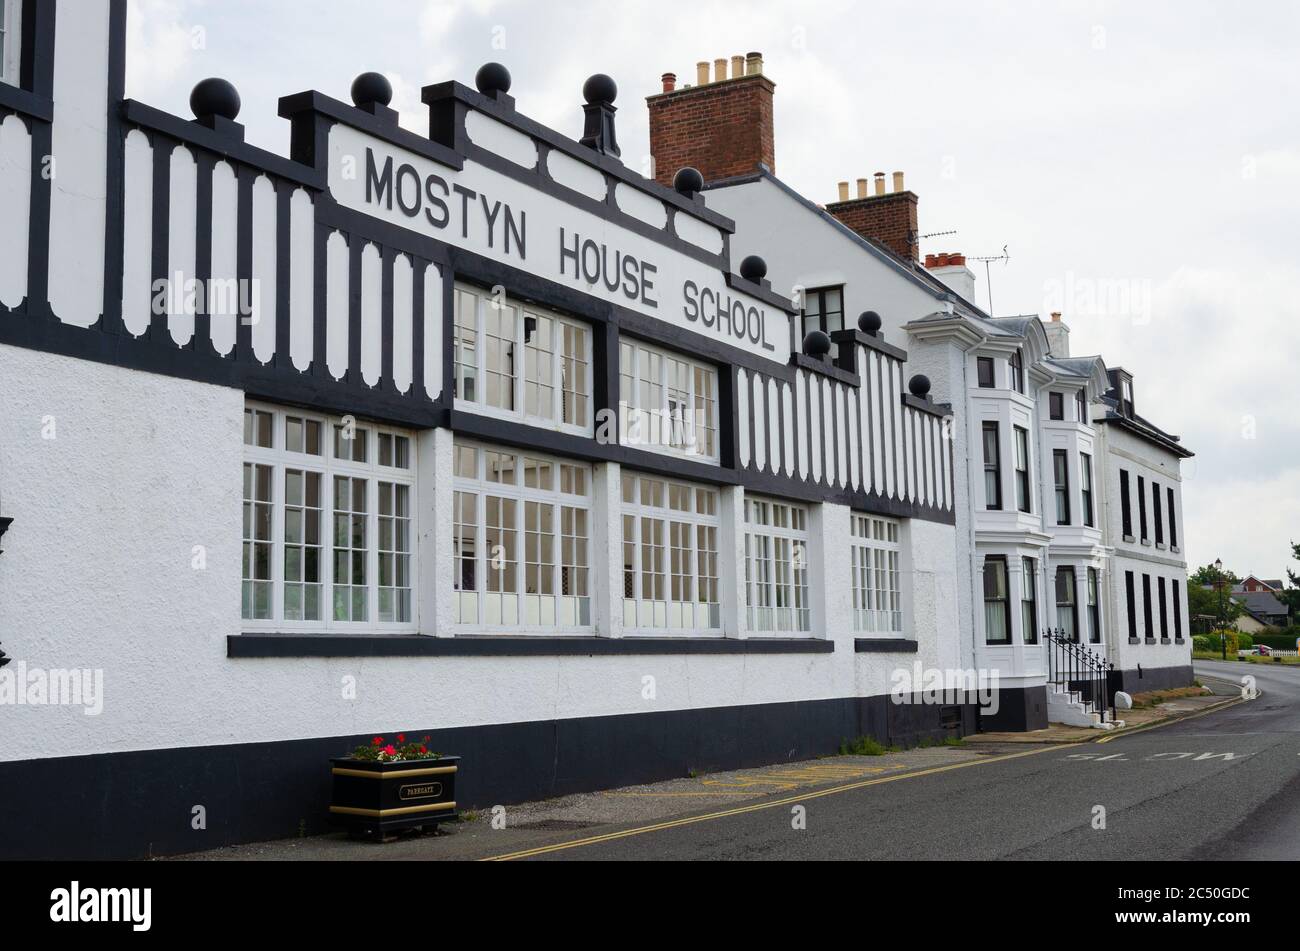 Parkgate, Wirral, UK: Jun 17, 2020: Mostyn House School was opened as a boys boarding school. Later it became a co-educational day school, run by the Stock Photo